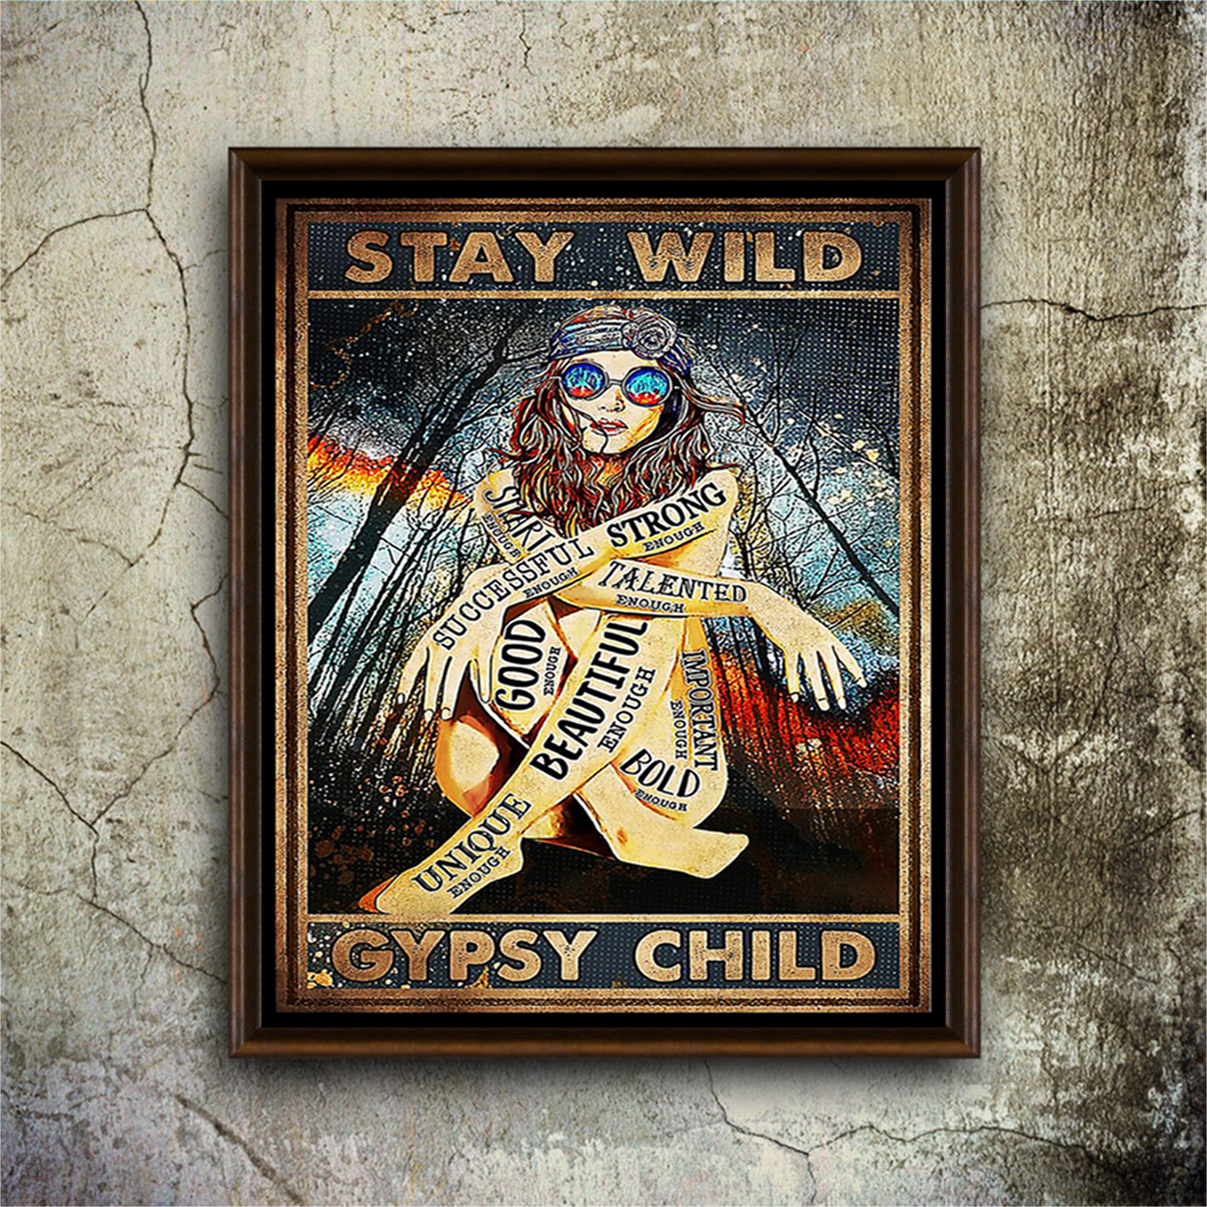 Hippie girl glasses stay wild gypsy child poster A1